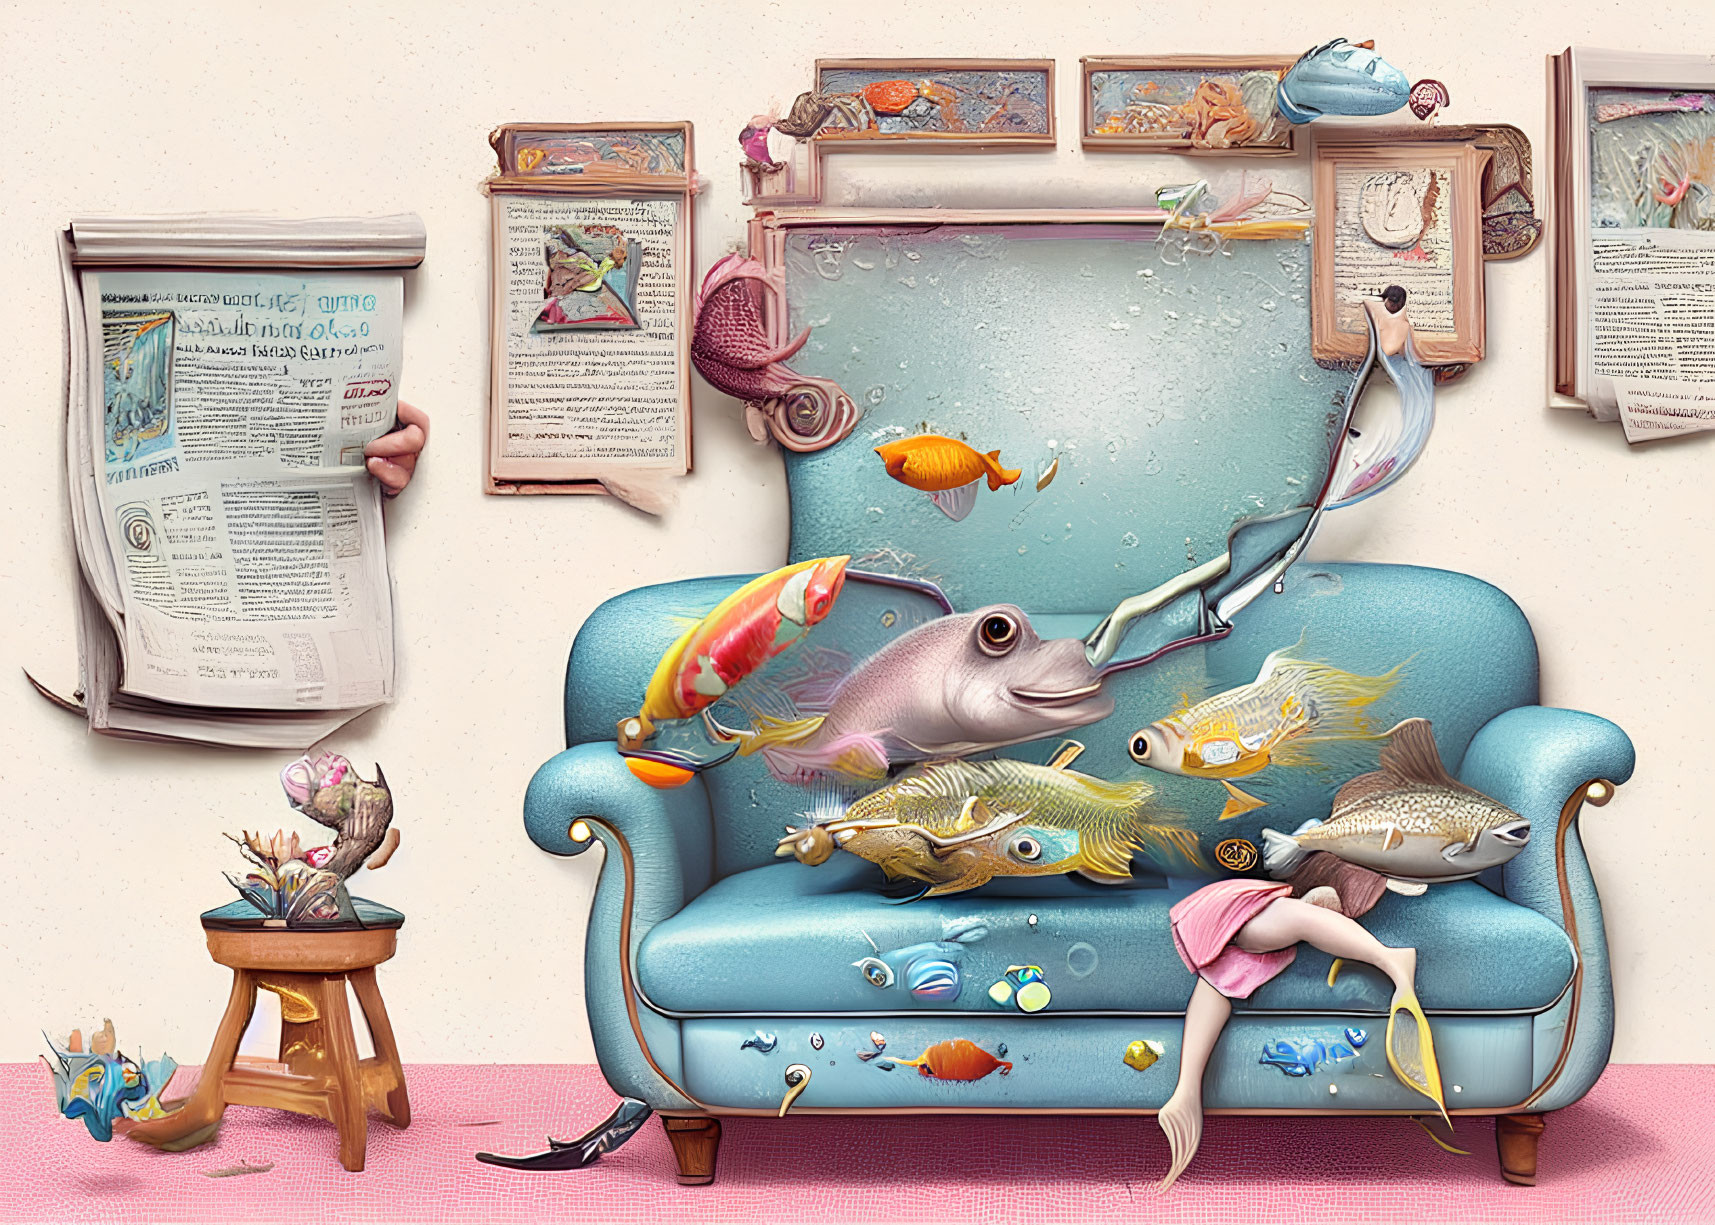 Surreal room with fish, floating teapot, and blue couch